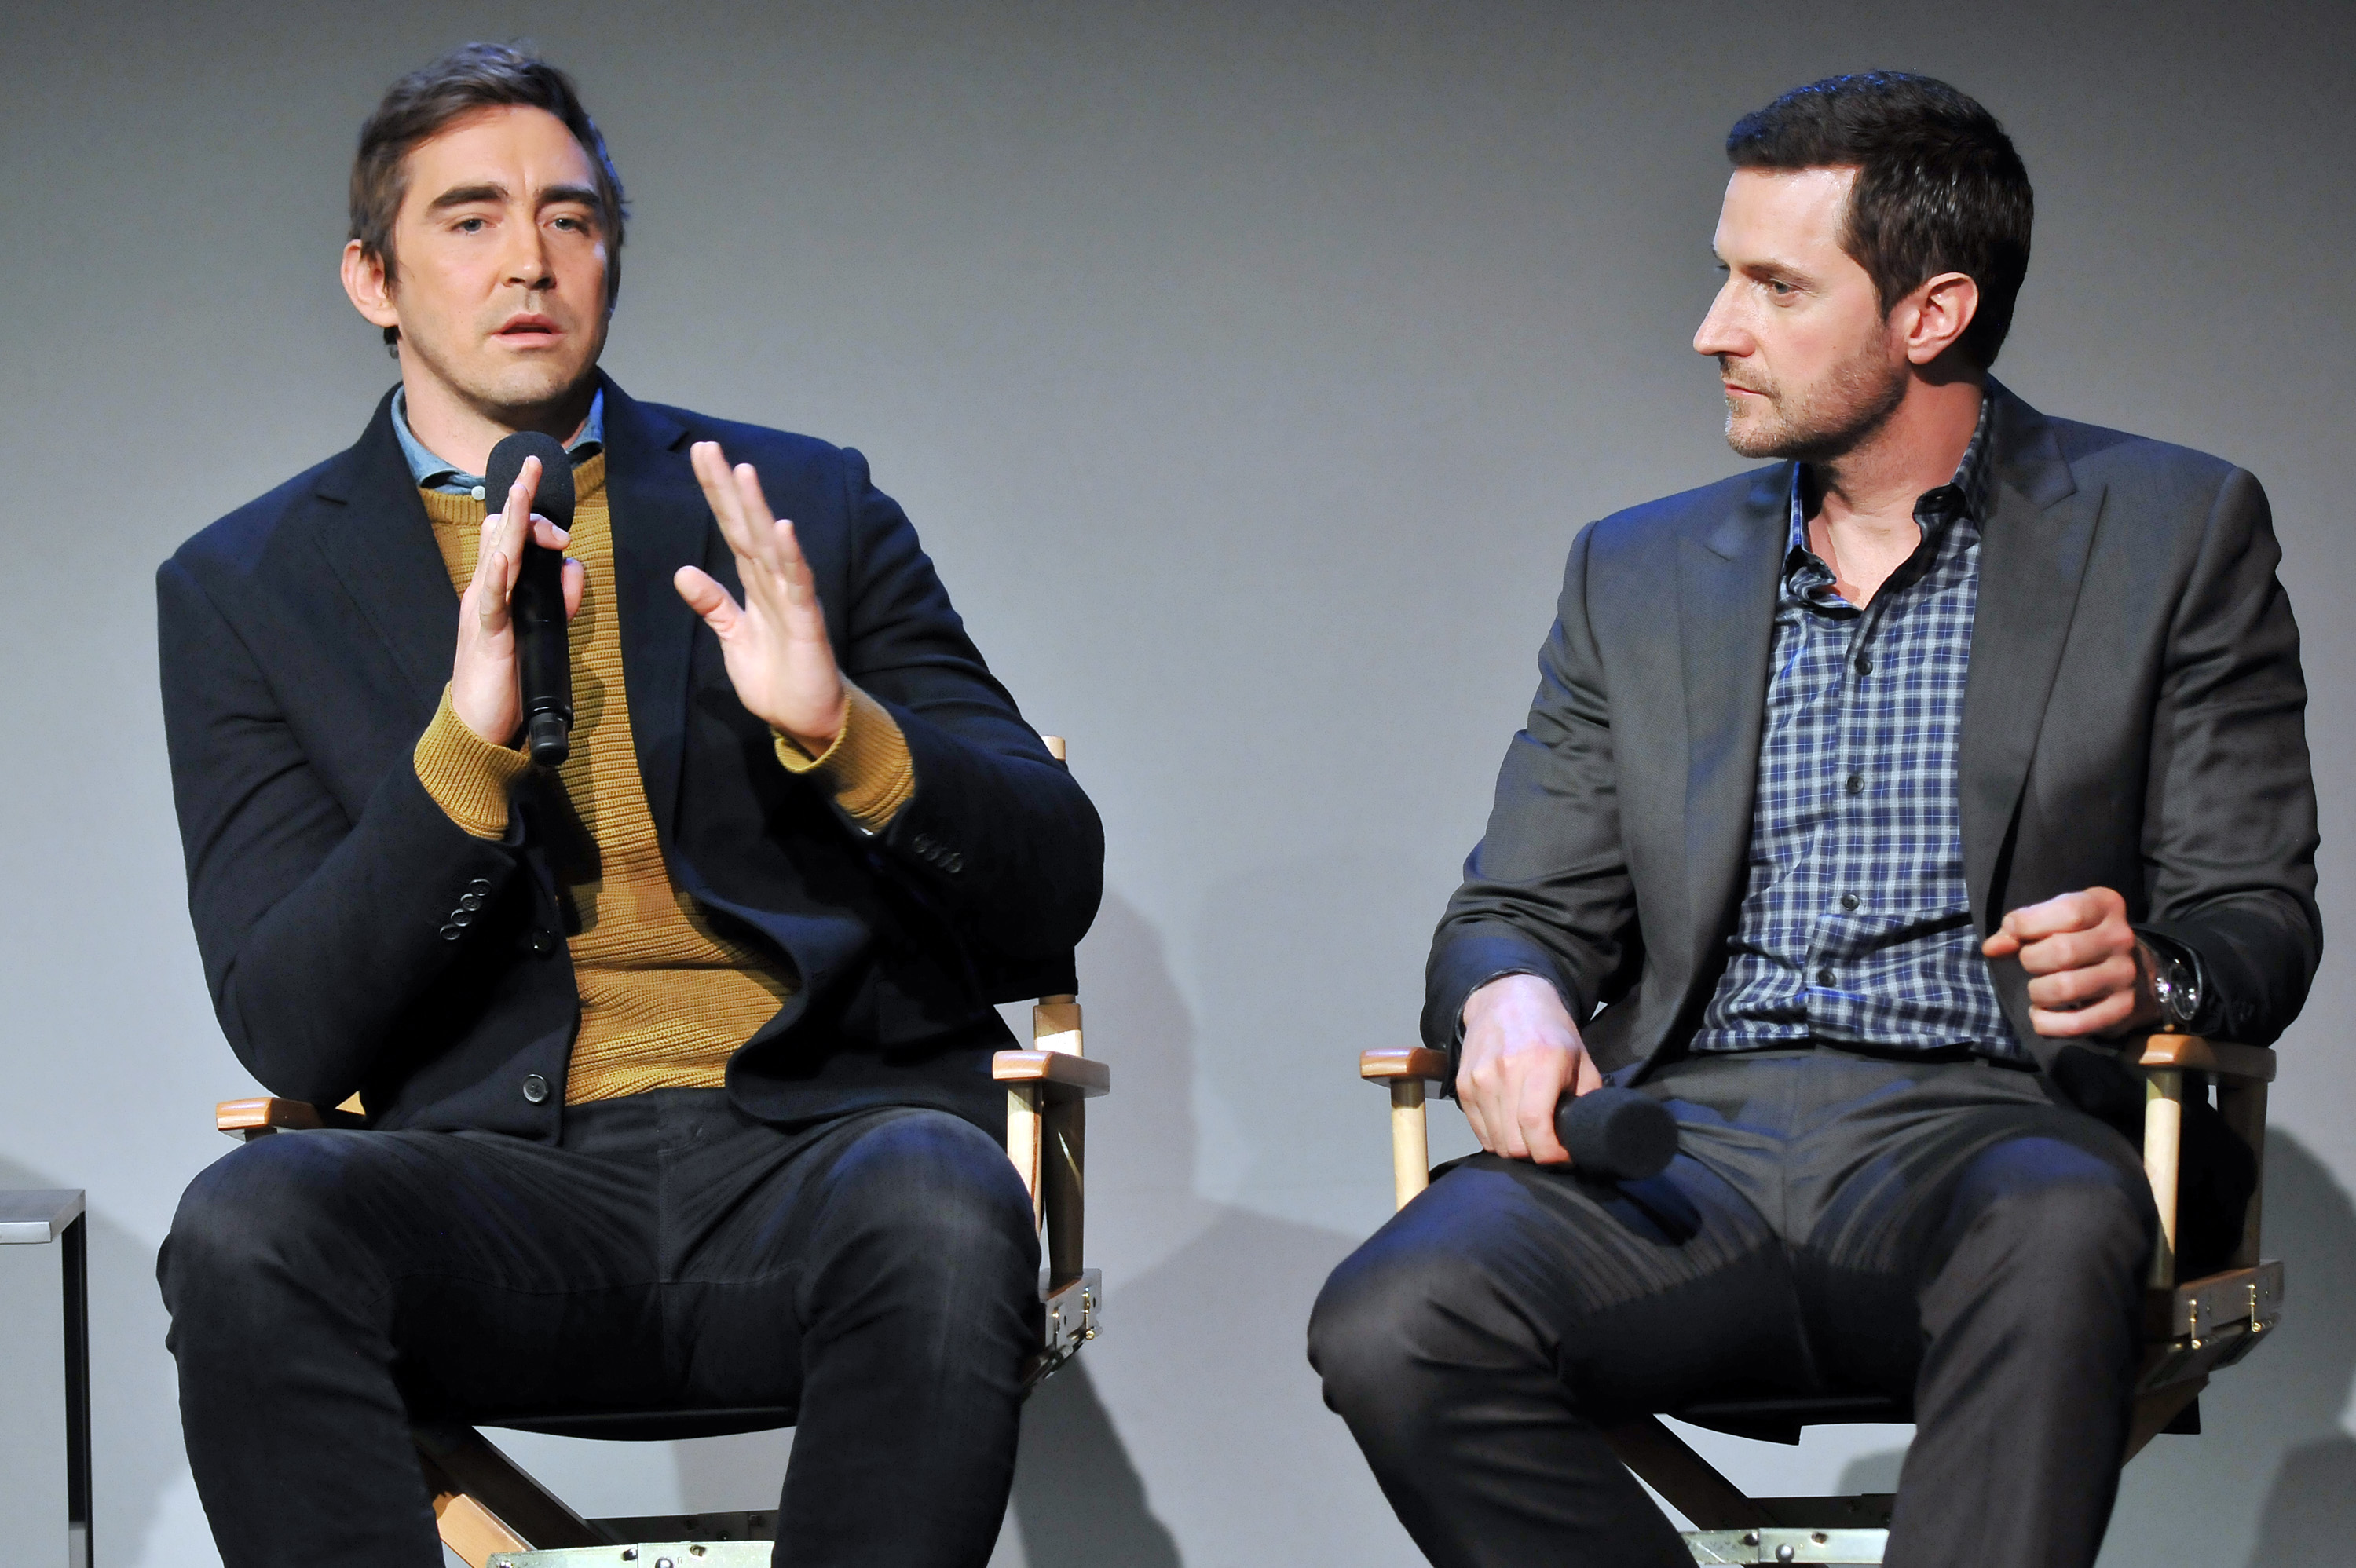  Lee Pace and Richard Armitage on December 11, 2014 in New York City | Source: Getty Images